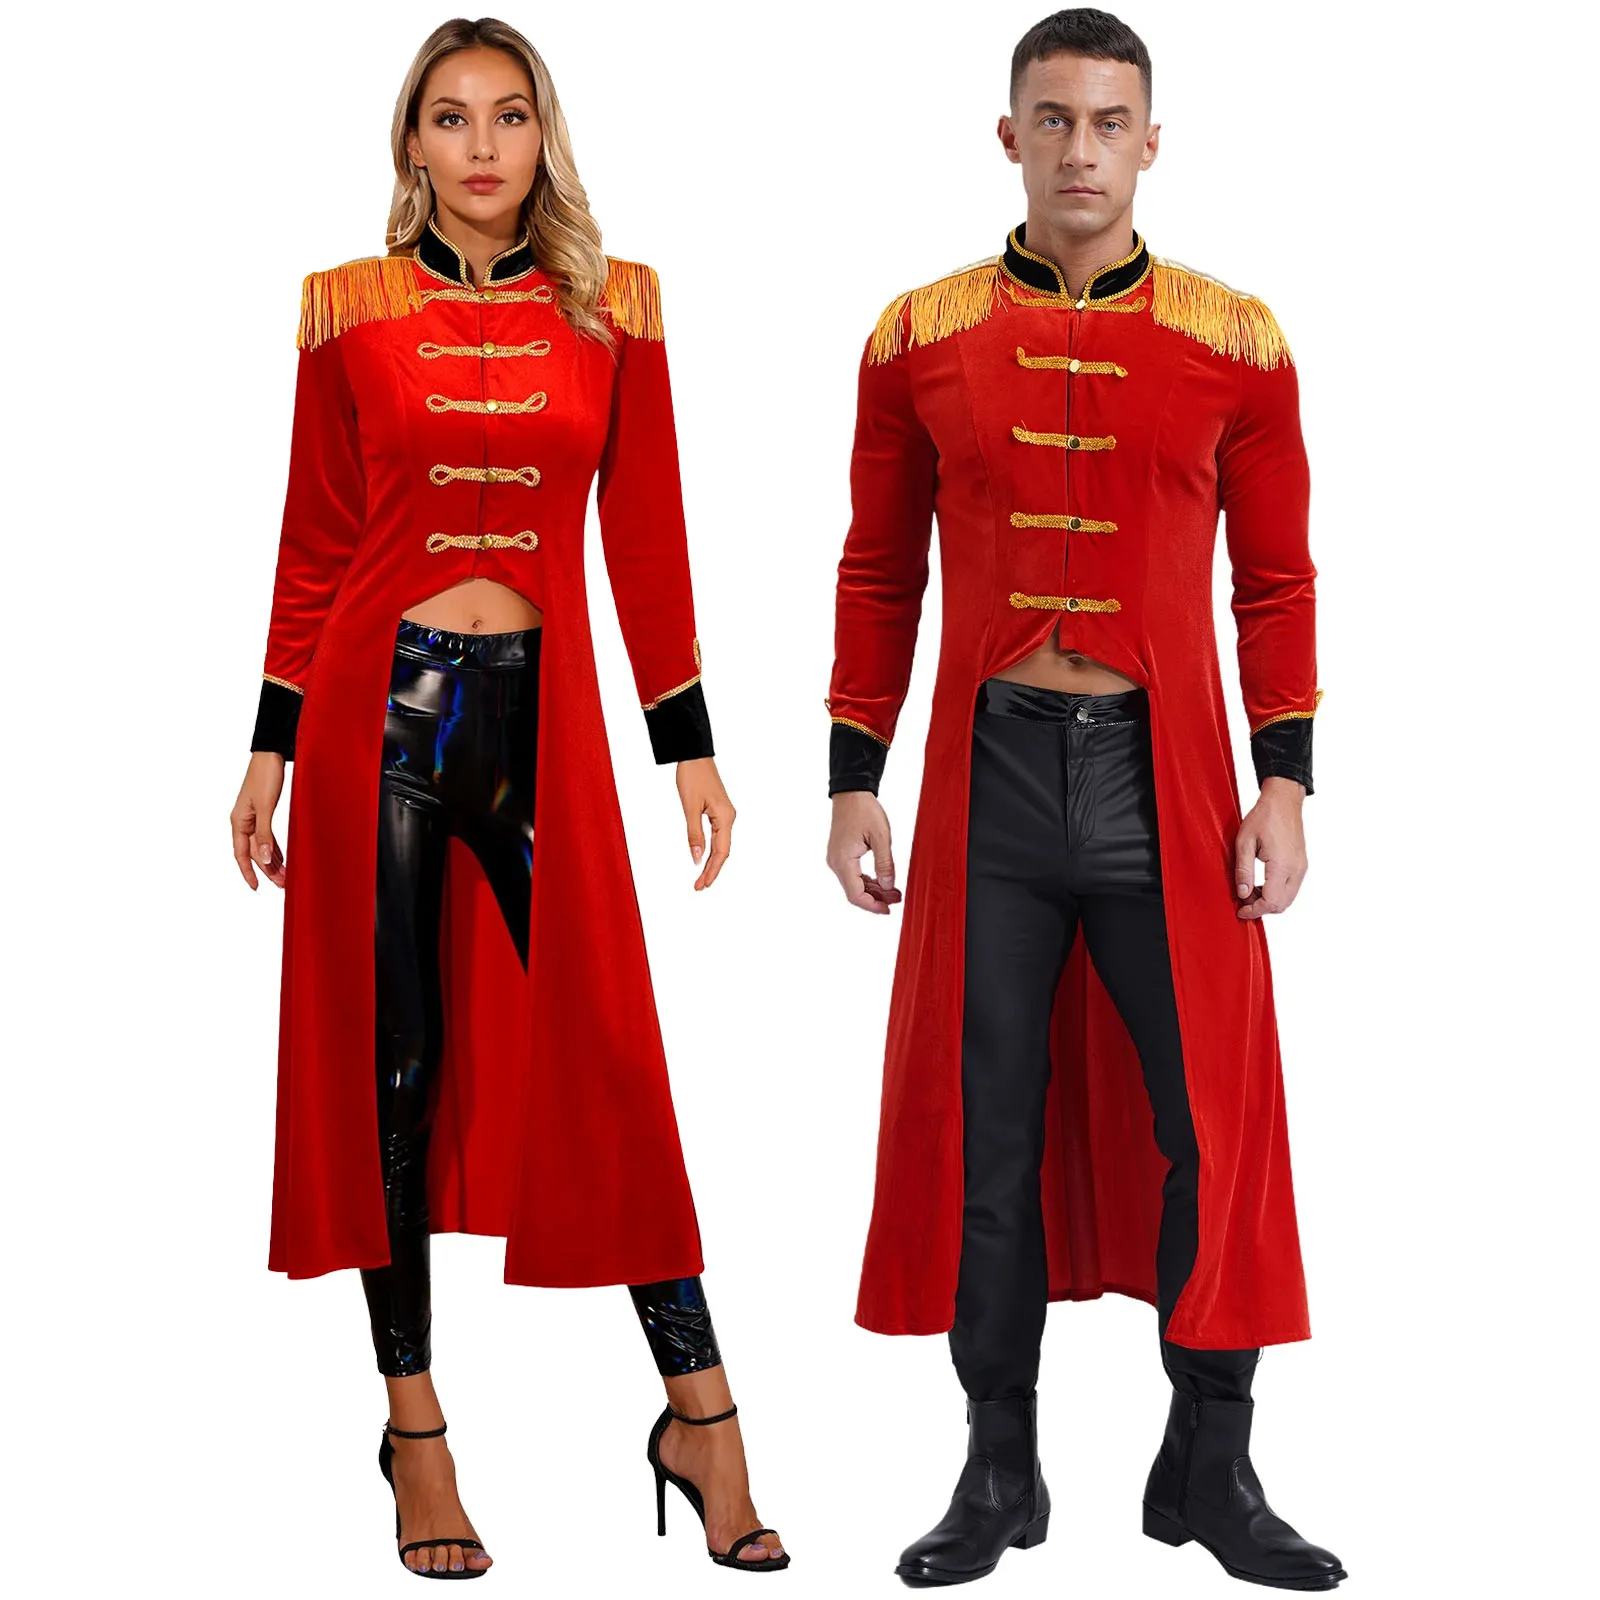 

Mens Women Ringmaster Jacket Costume Circus Cosplay Performance Velvet Trench Tailcoat Fringe Boards Renaissance Gothic Clothes